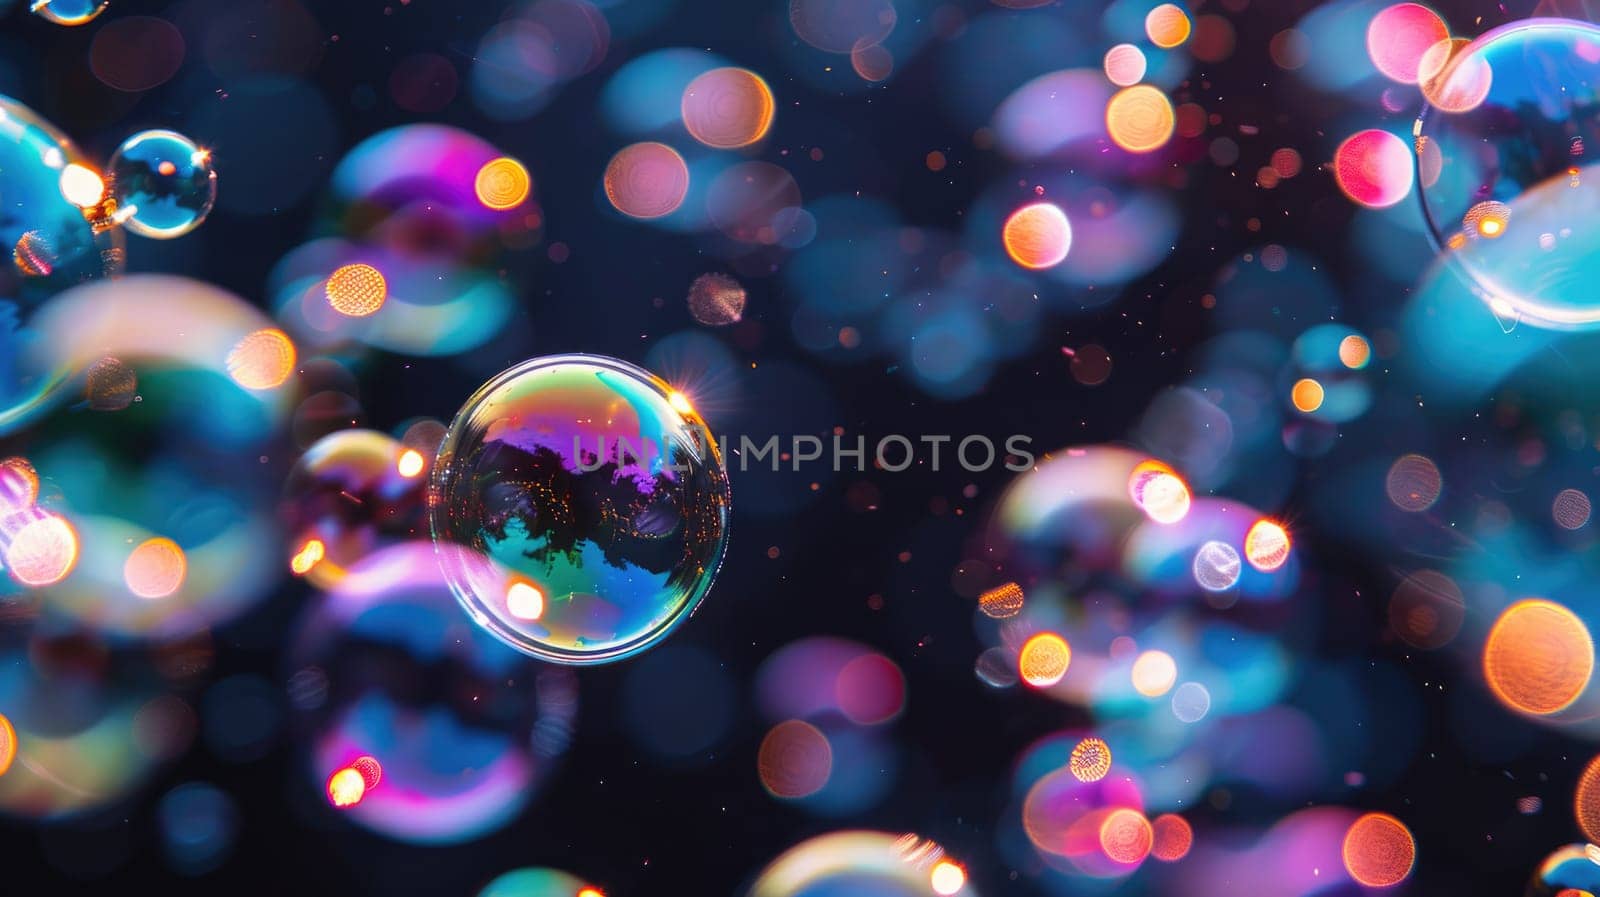 A colorful image of bubbles with a dark background. The bubbles are of different colors and sizes, and they are scattered all over the image. Scene is playful and whimsical